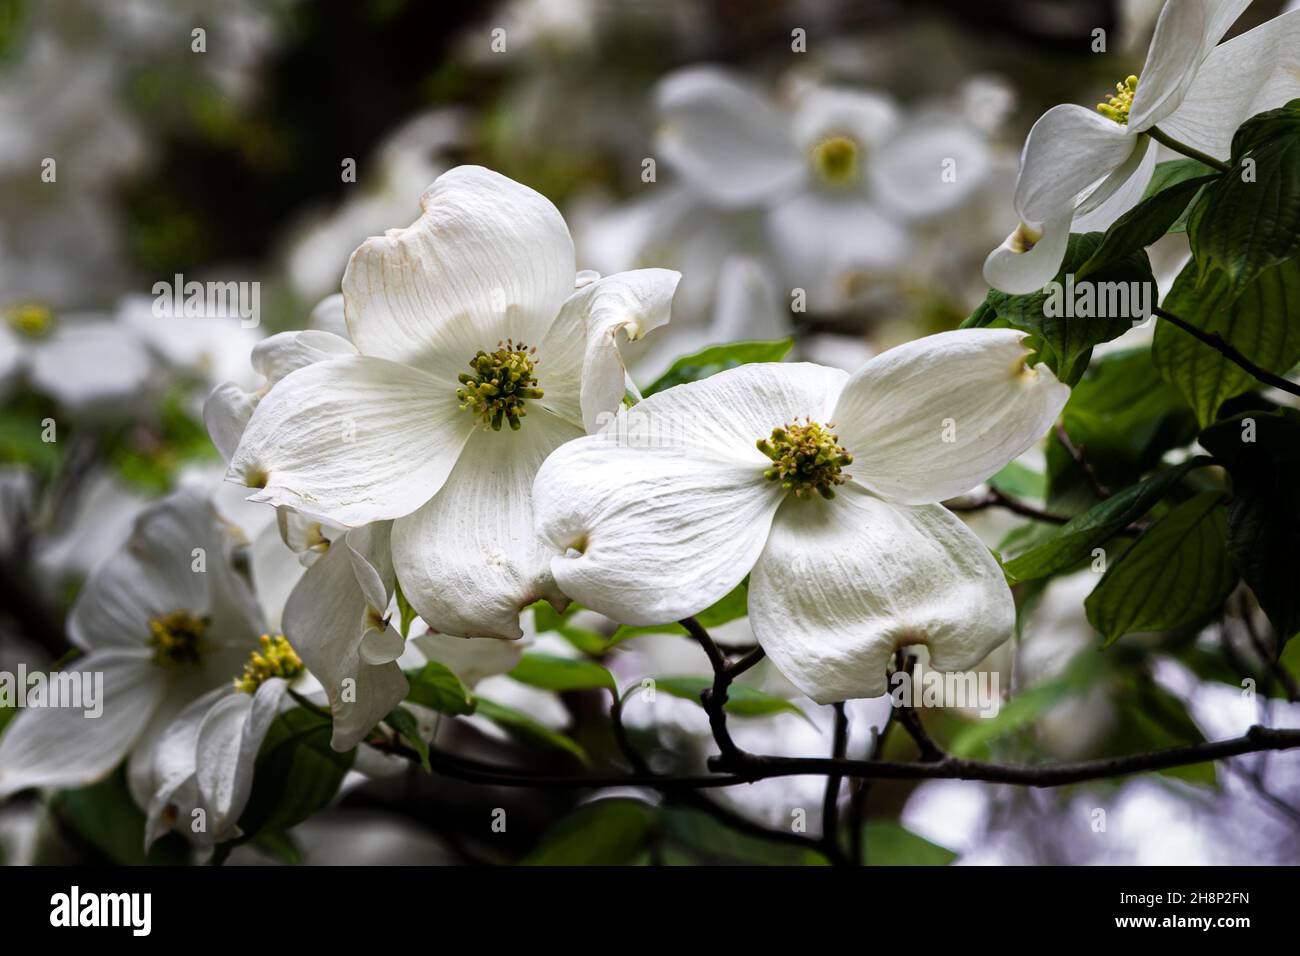 Closeup of a pair of blossoms on Flowering Dogwood Tree (Cornus florida) at Missouri Botanical Garden. Green leaves, more flowers in background. Stock Photo